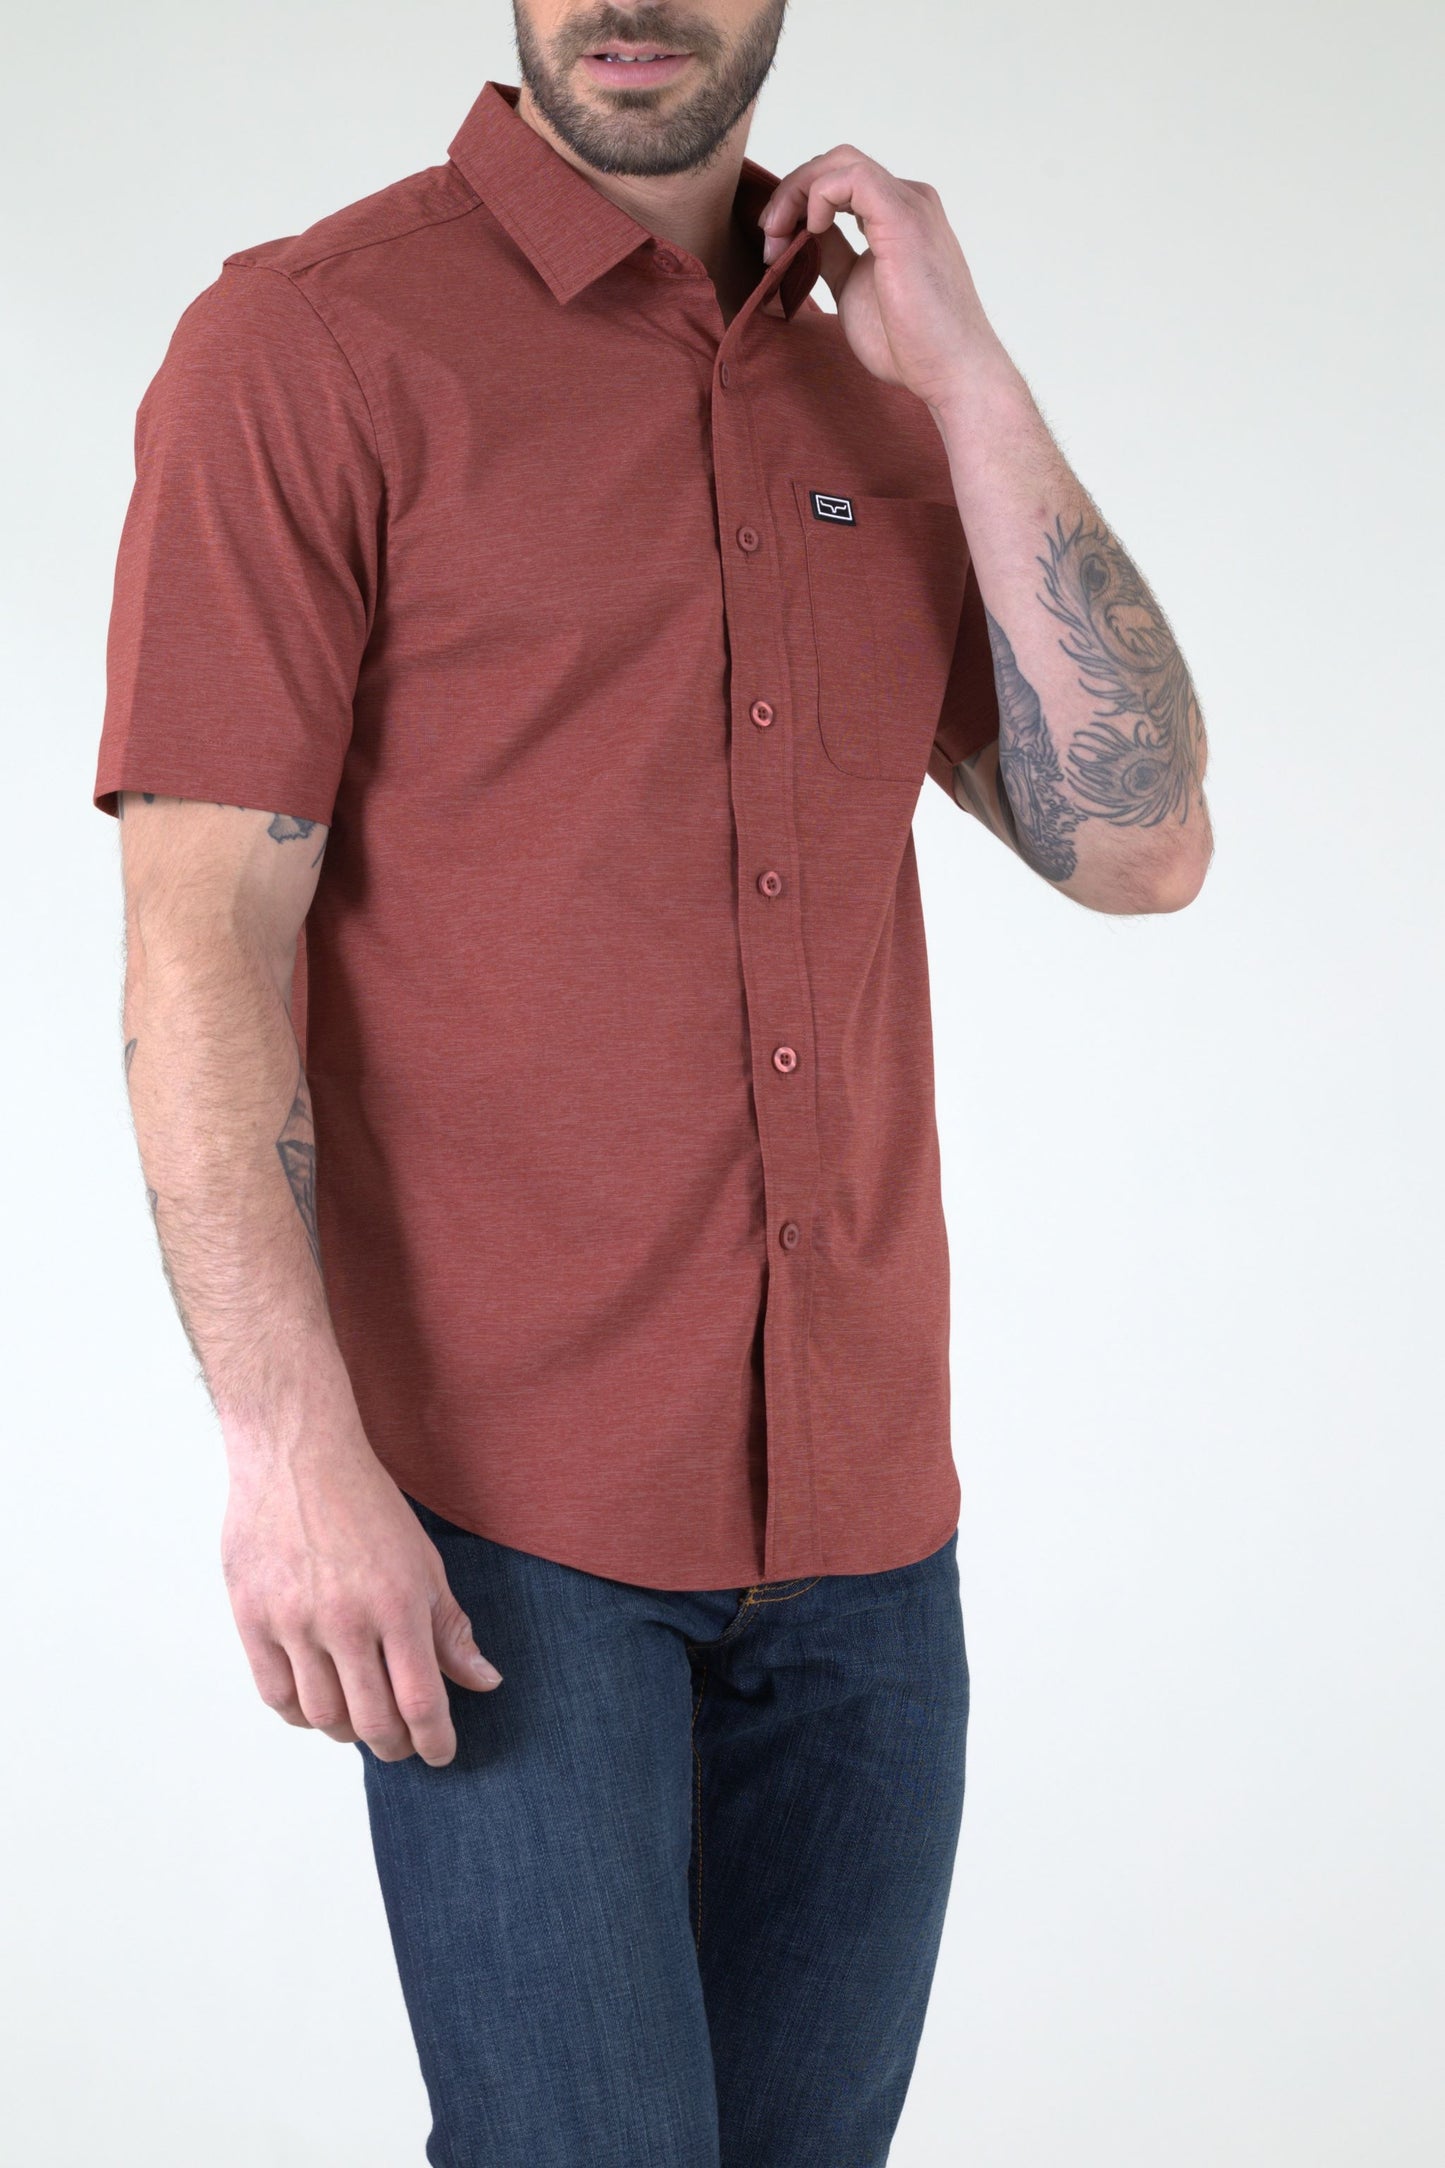 Kimes Ranch Linville Short Sleeve Dress Shirt in Red